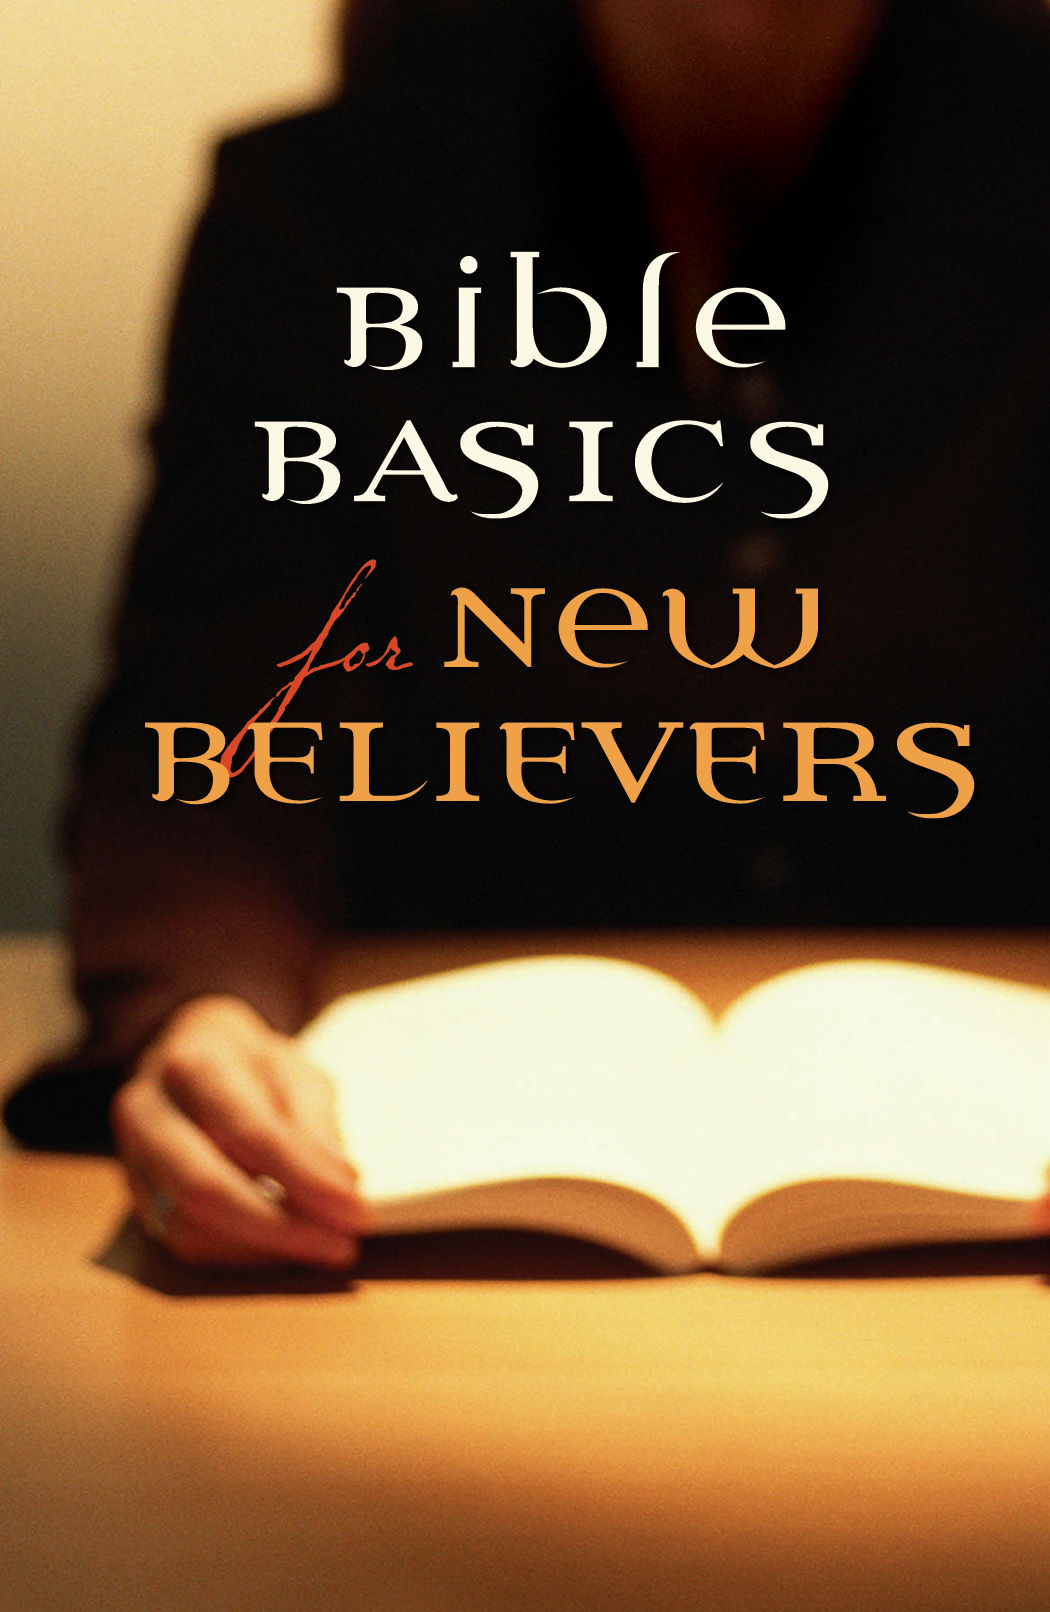 bible-basics-for-new-believers-pack-of-25-by-zuck-roy-b-at-eden